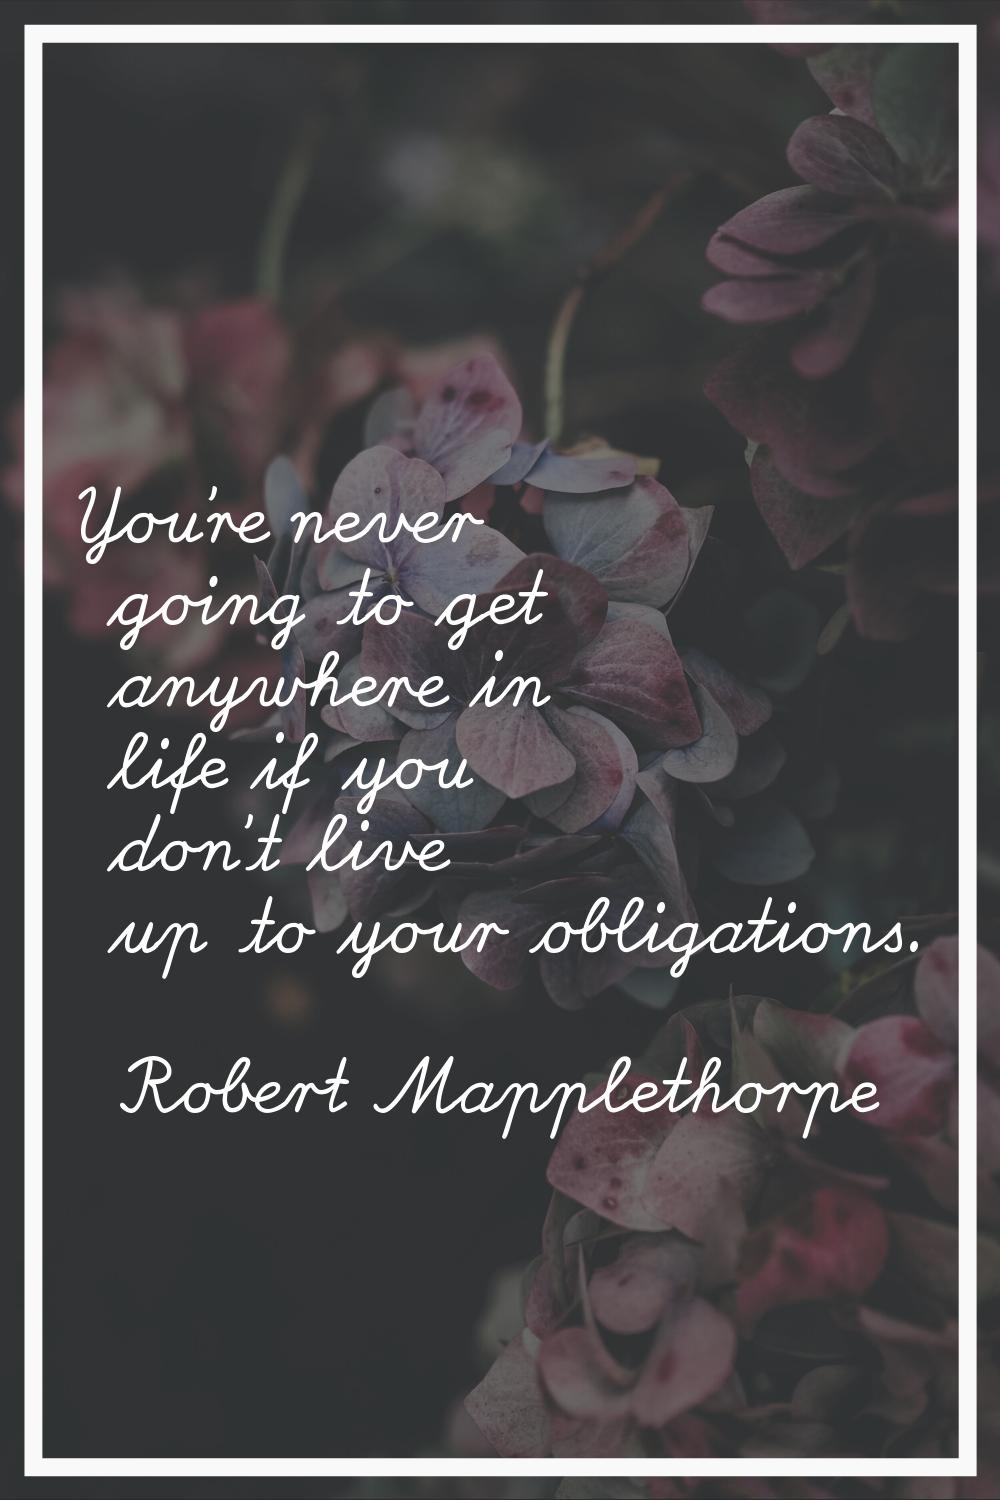 You're never going to get anywhere in life if you don't live up to your obligations.